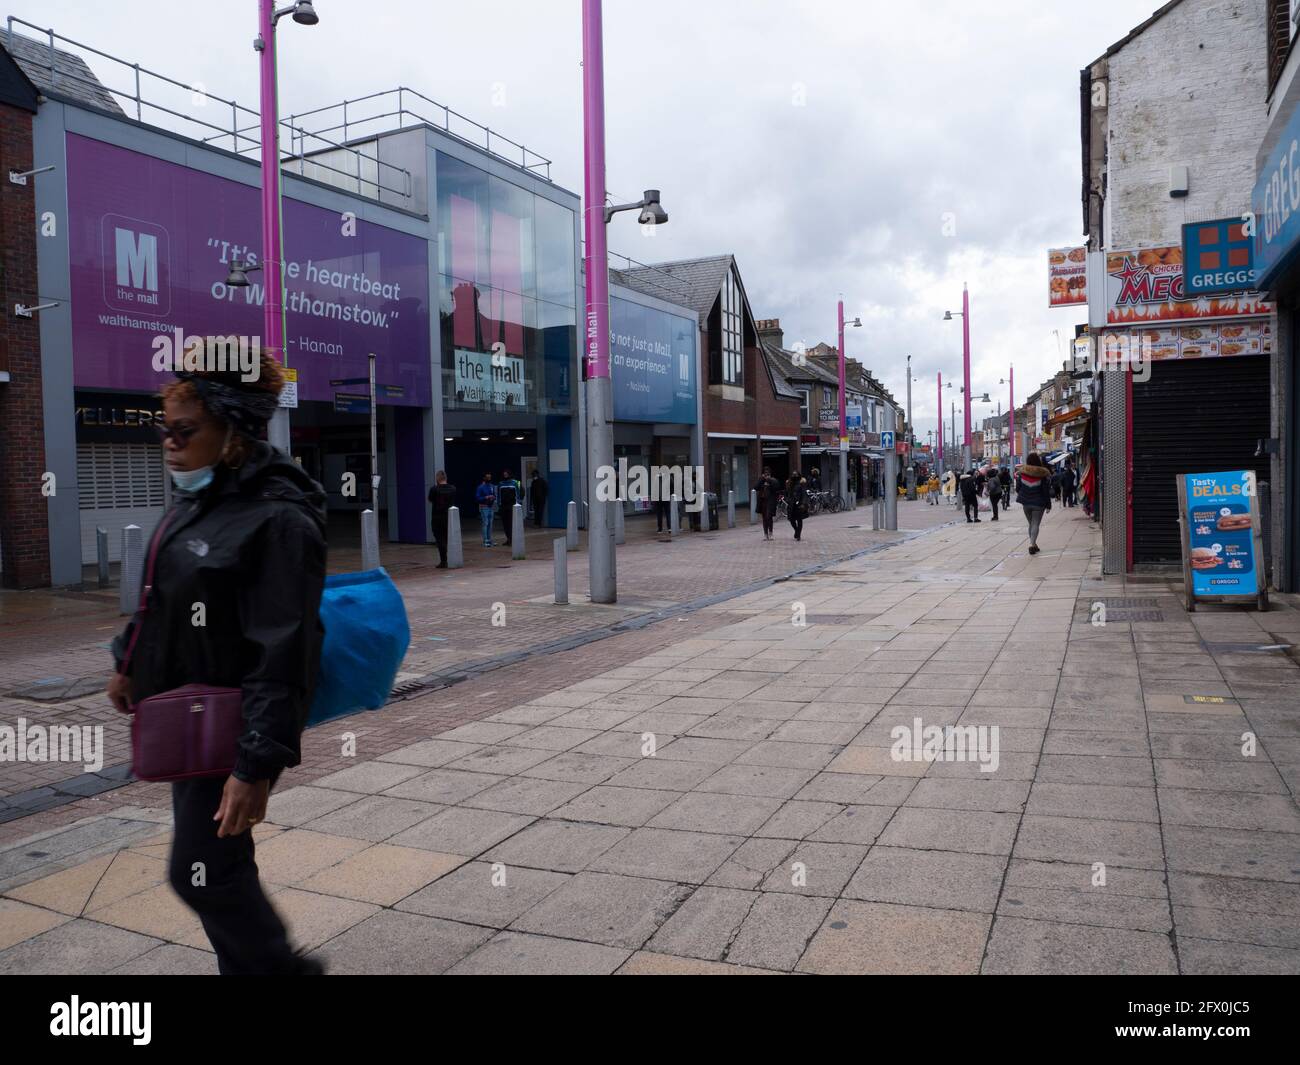 Walthamstow High Street, London with The Mall in  background Stock Photo